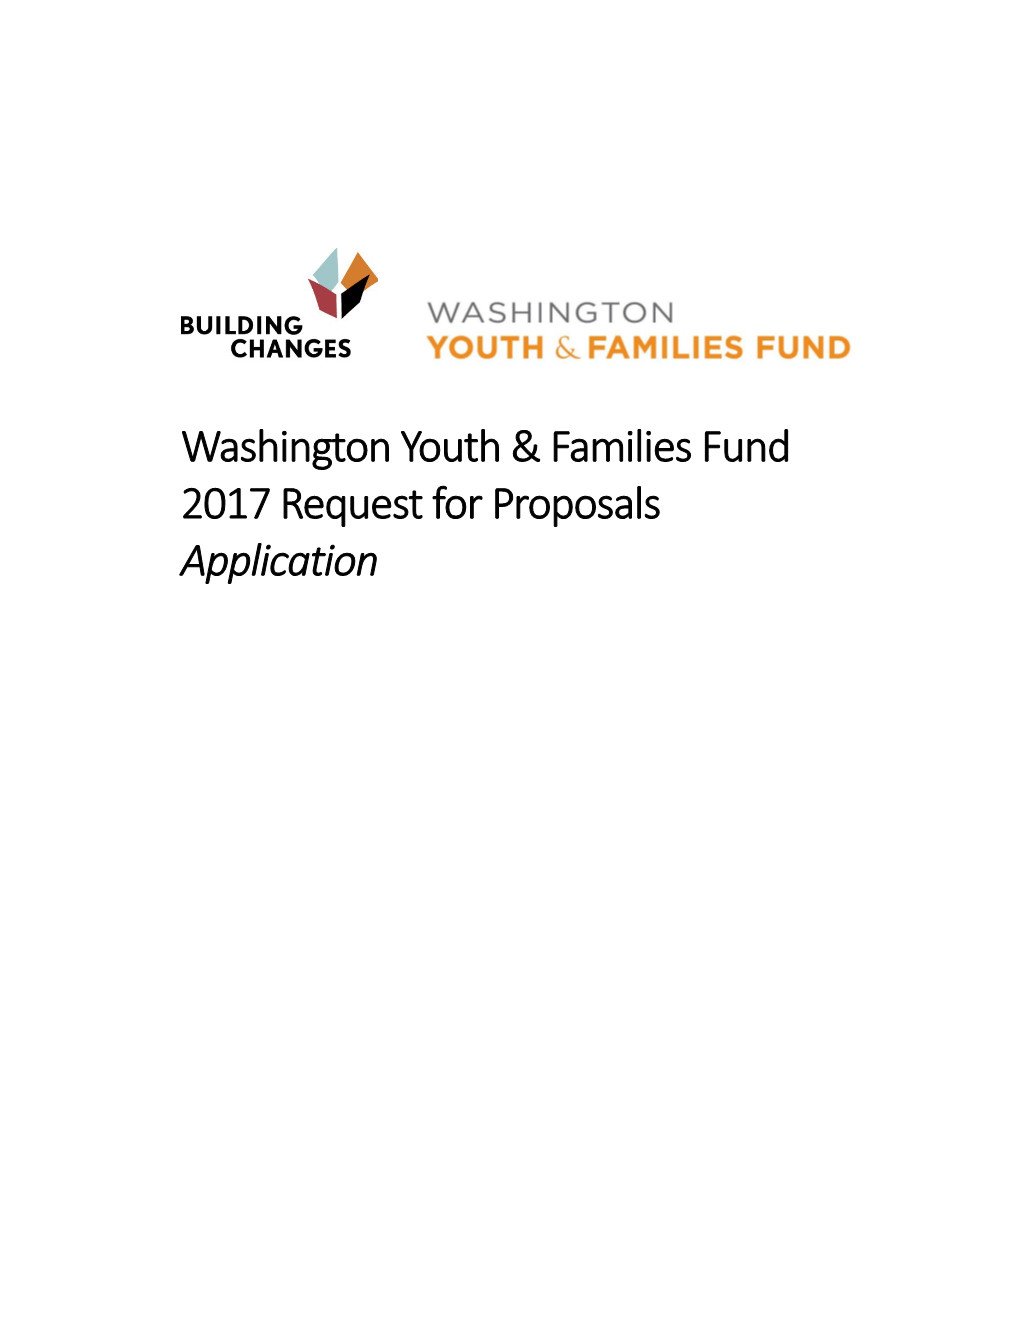 Washington Youth & Families Fund Application Cover Sheet